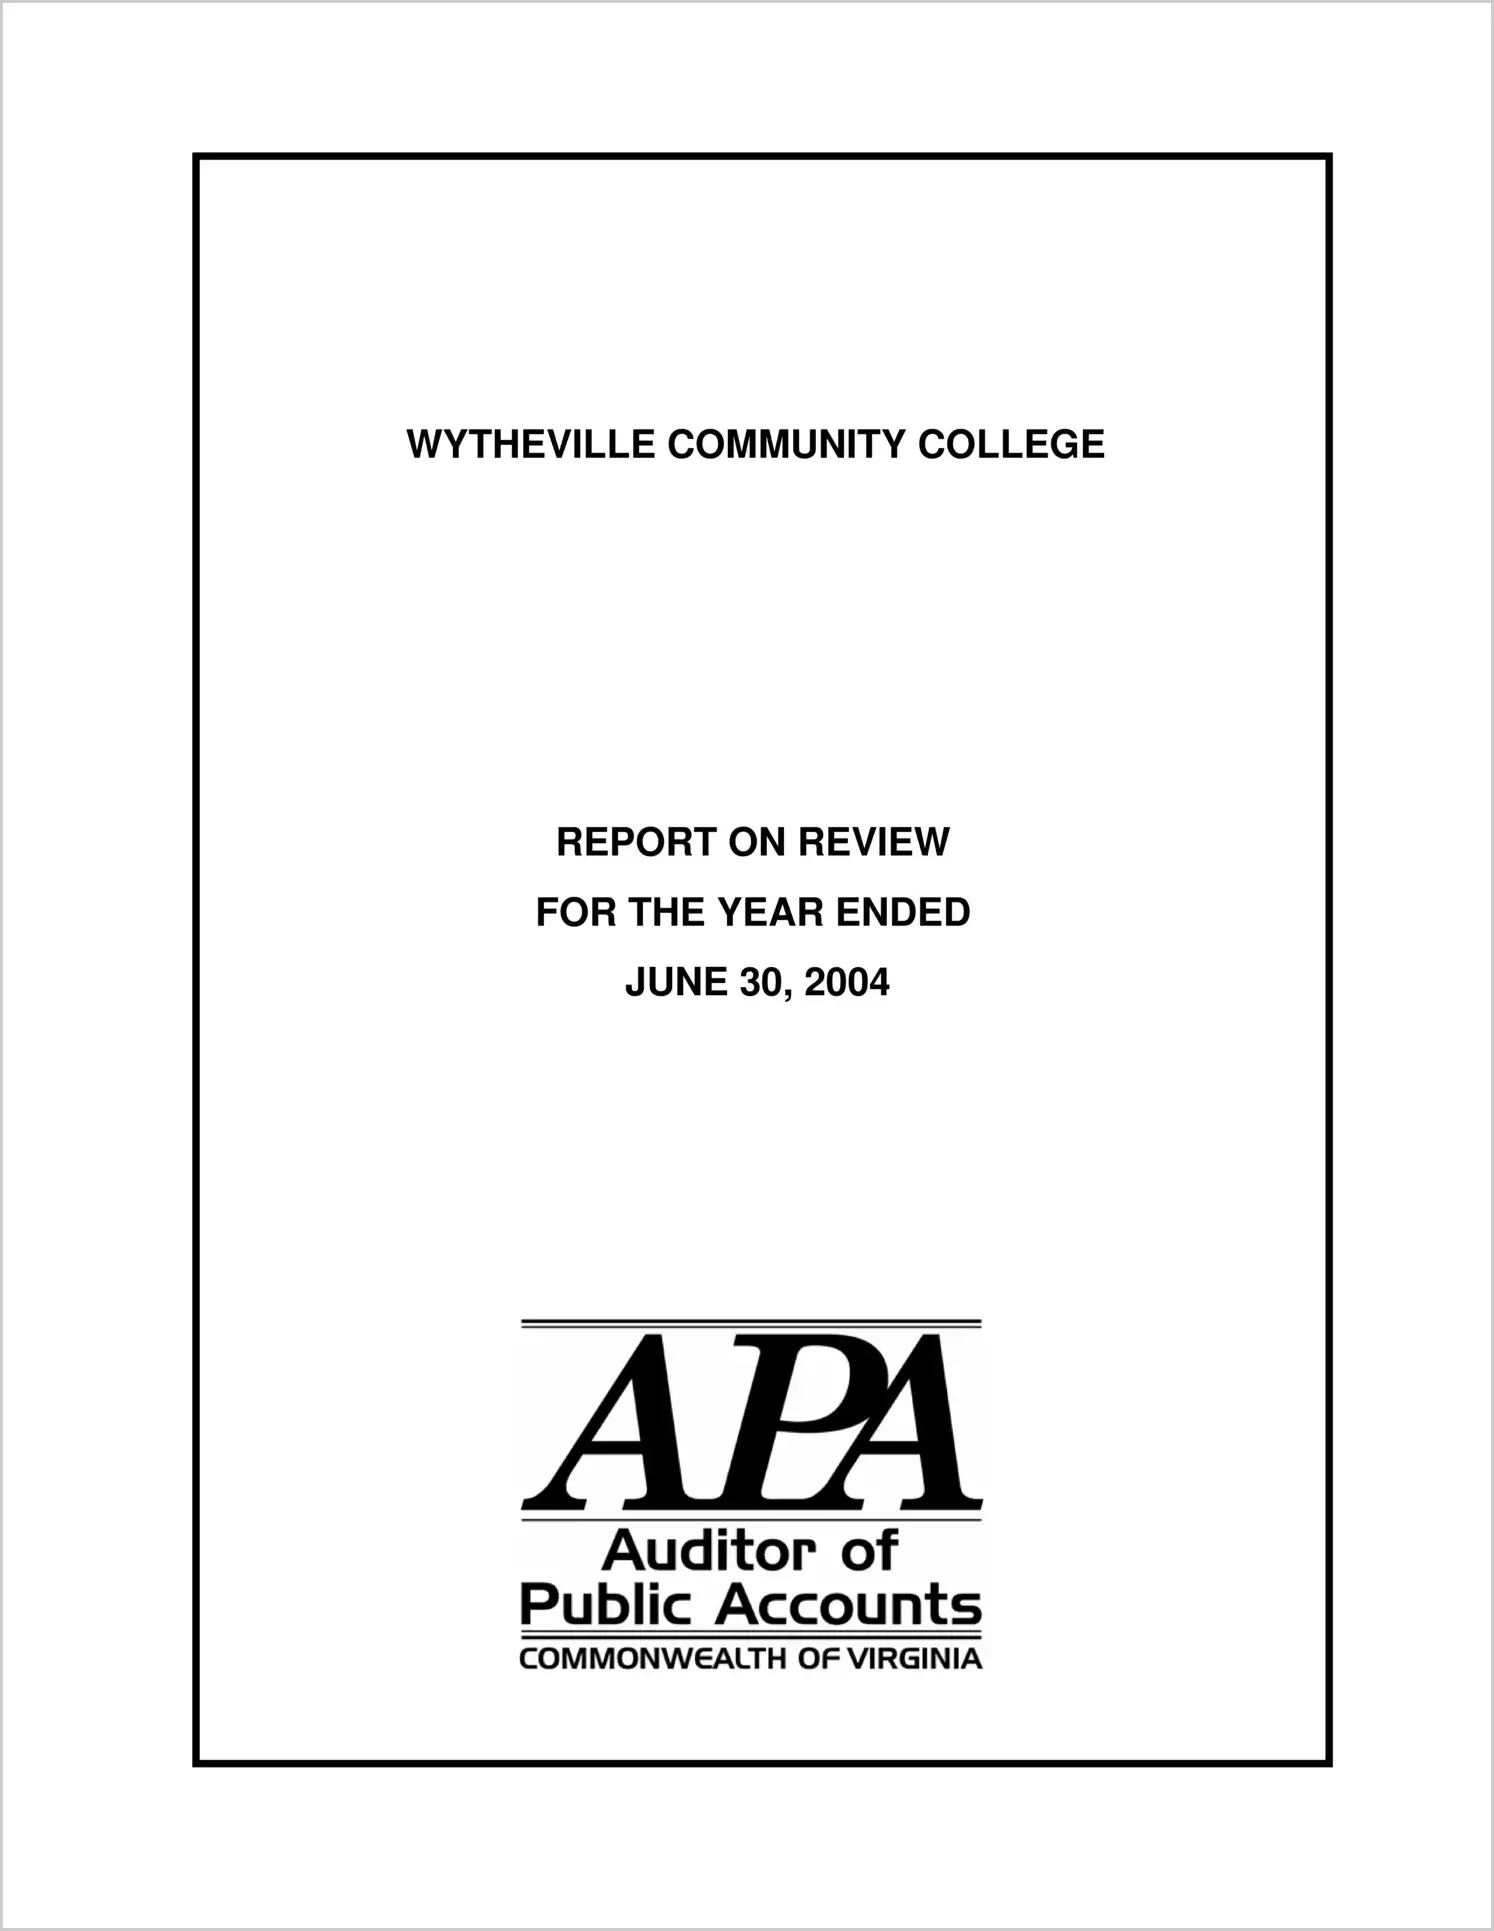 Wytheville Community College Report on review for the year ended June 30, 2004